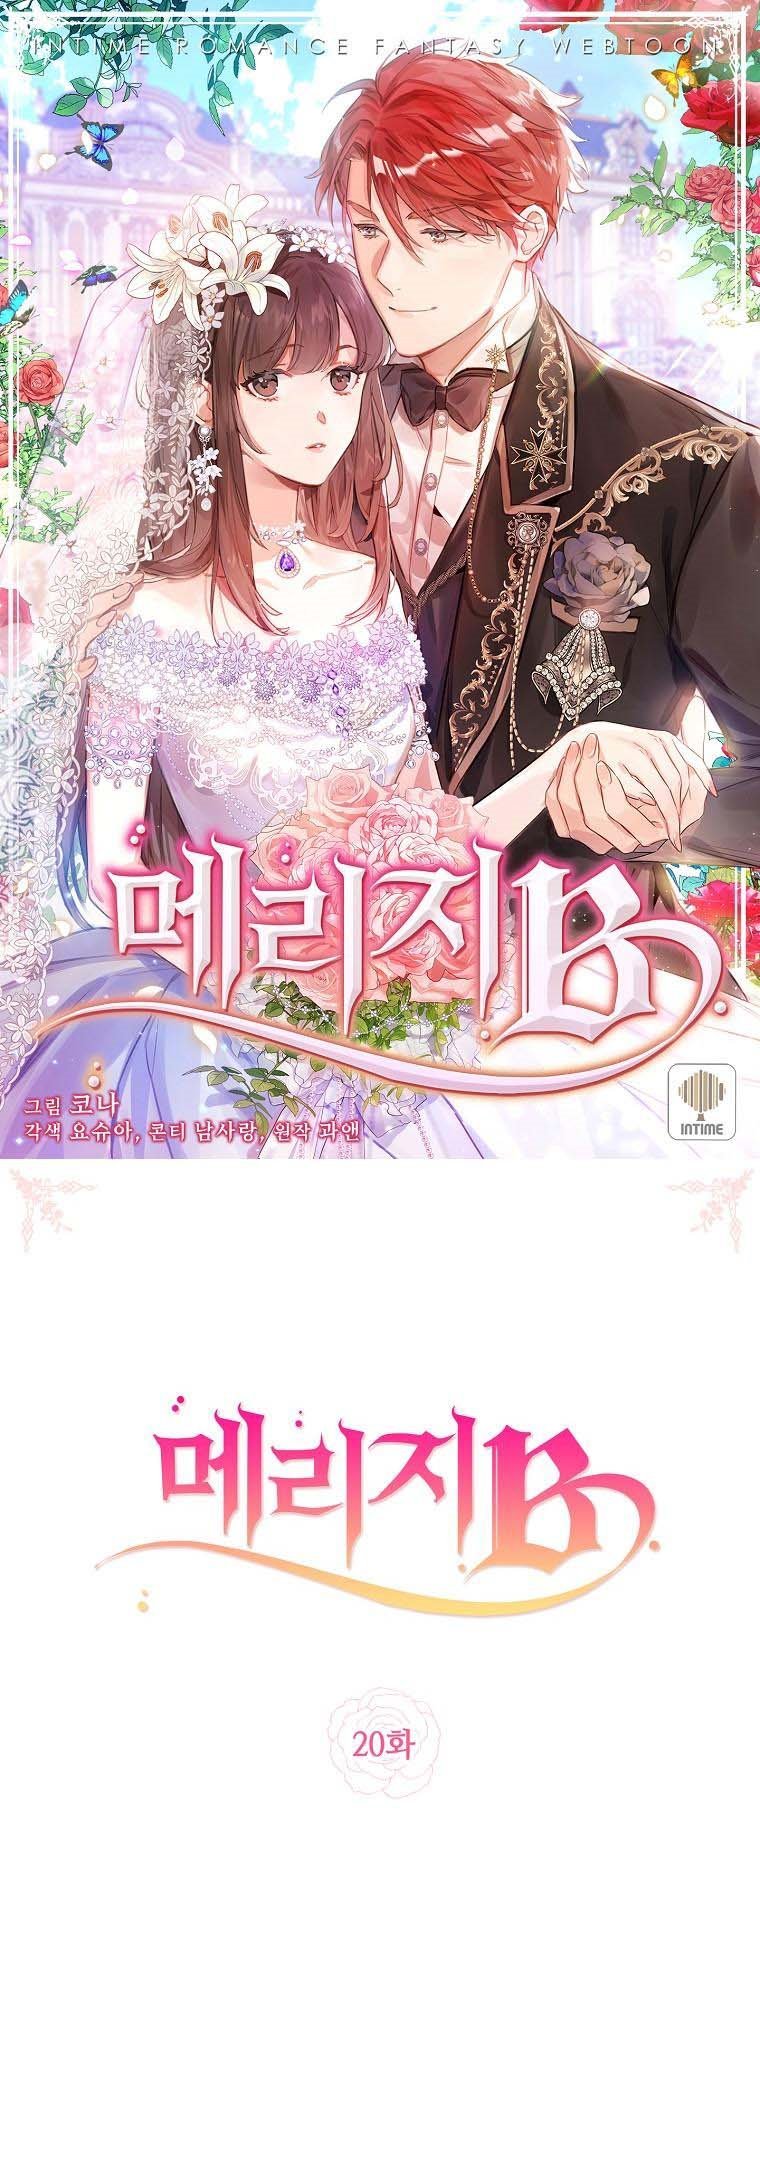 Marriage B chapter 20